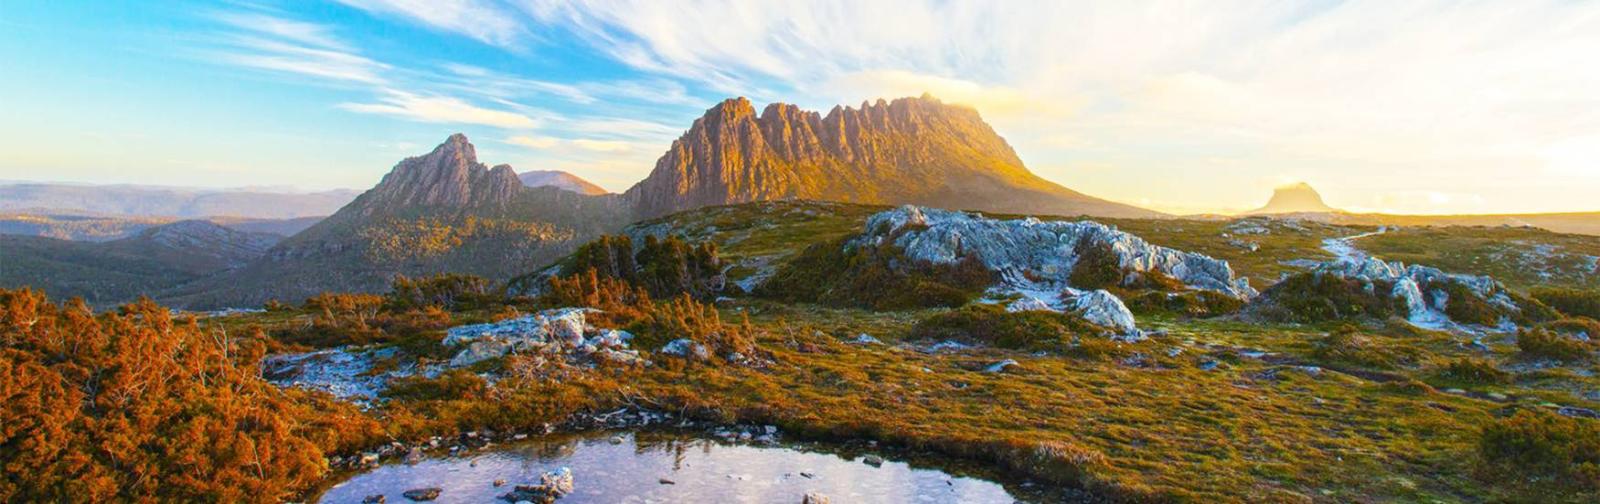 How To Get To Cradle Mountain